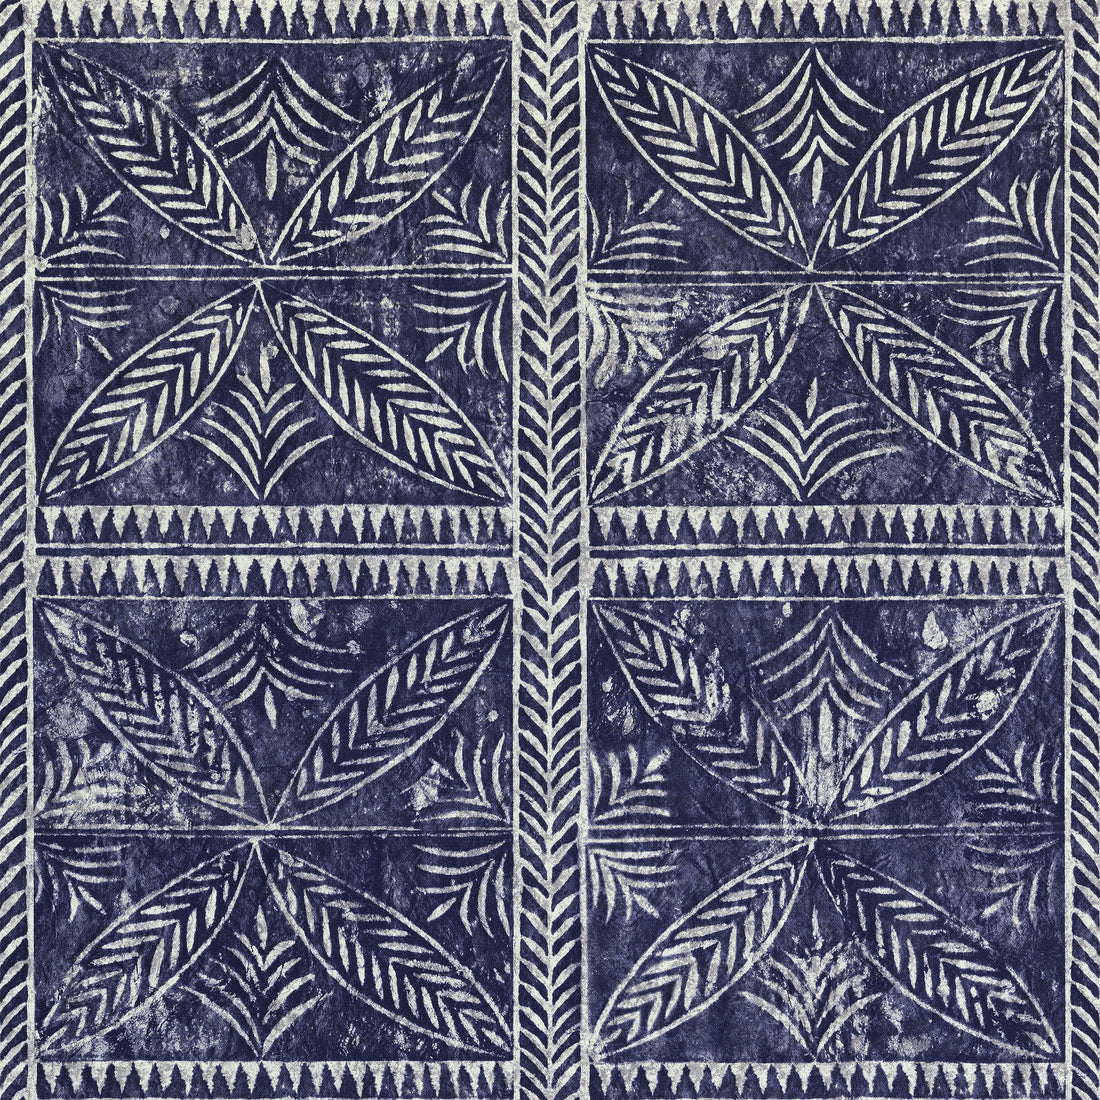 Timbuktu fabric in navy color - pattern number F910253 - by Thibaut in the Colony collection